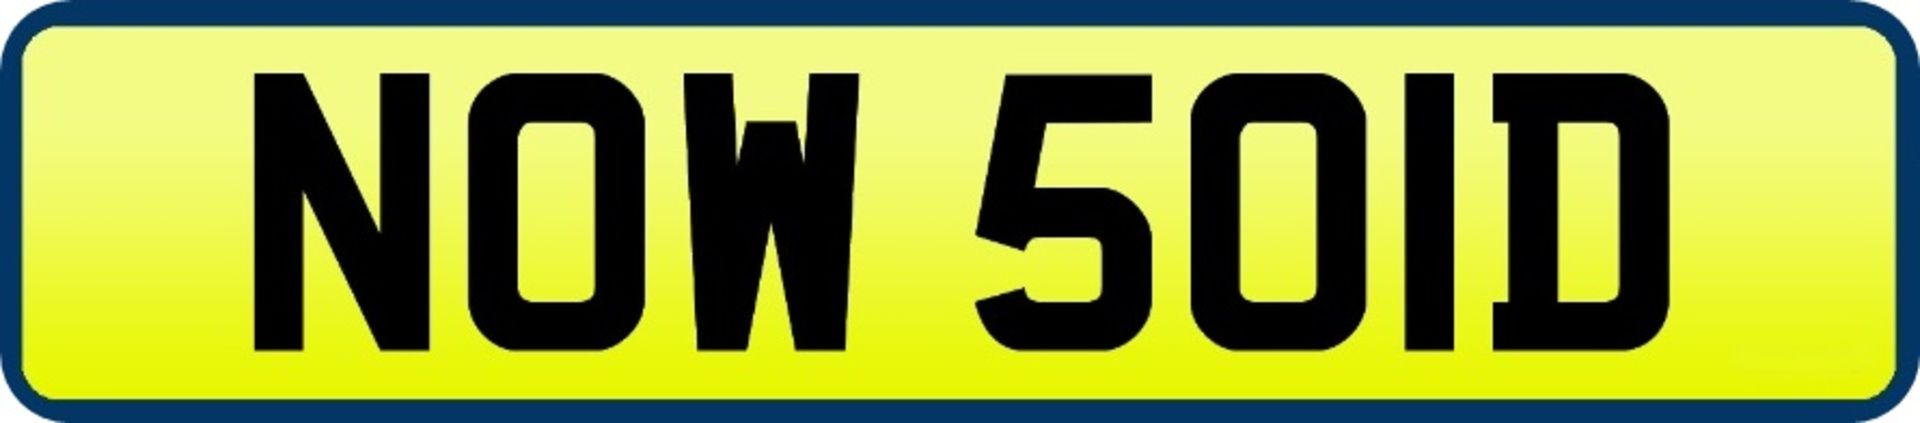 1 x Private Vehicle Registration Car Plate - NOW 50LD- CL590 - Location: Altrincham WA14More